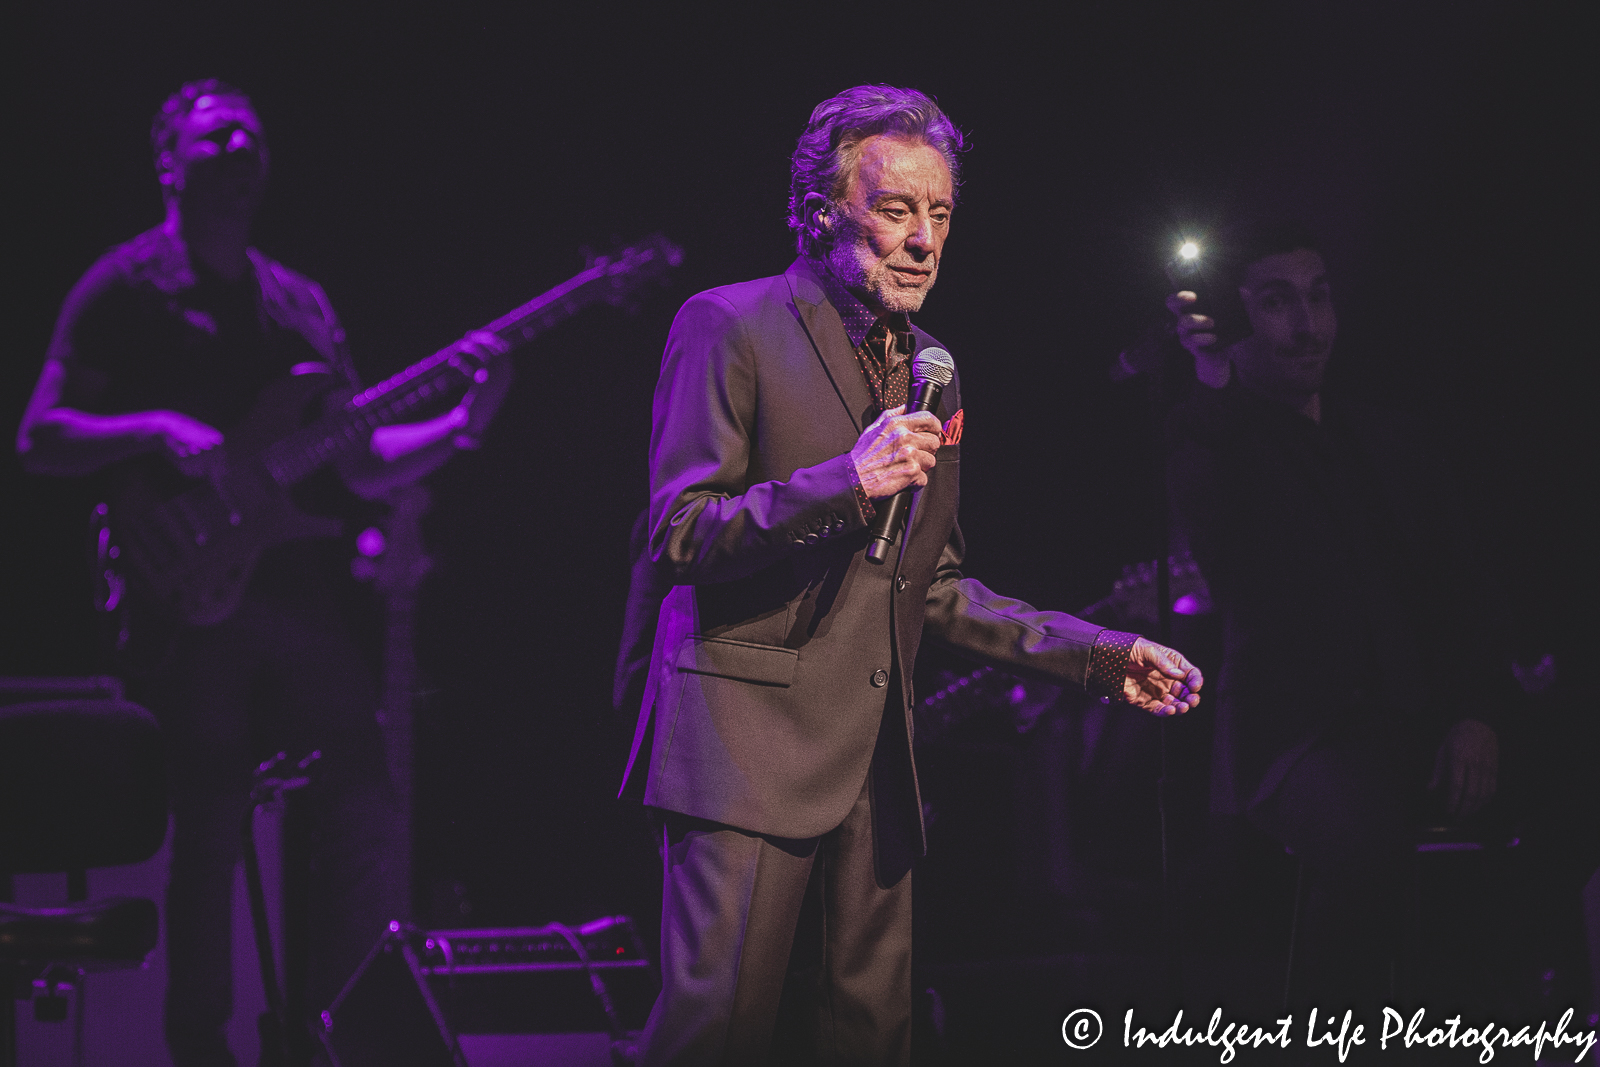 Frankie Valli performing live as fans wave their camera lights at the Kauffman Center in downtown Kansas City, MO on June 4, 2022.